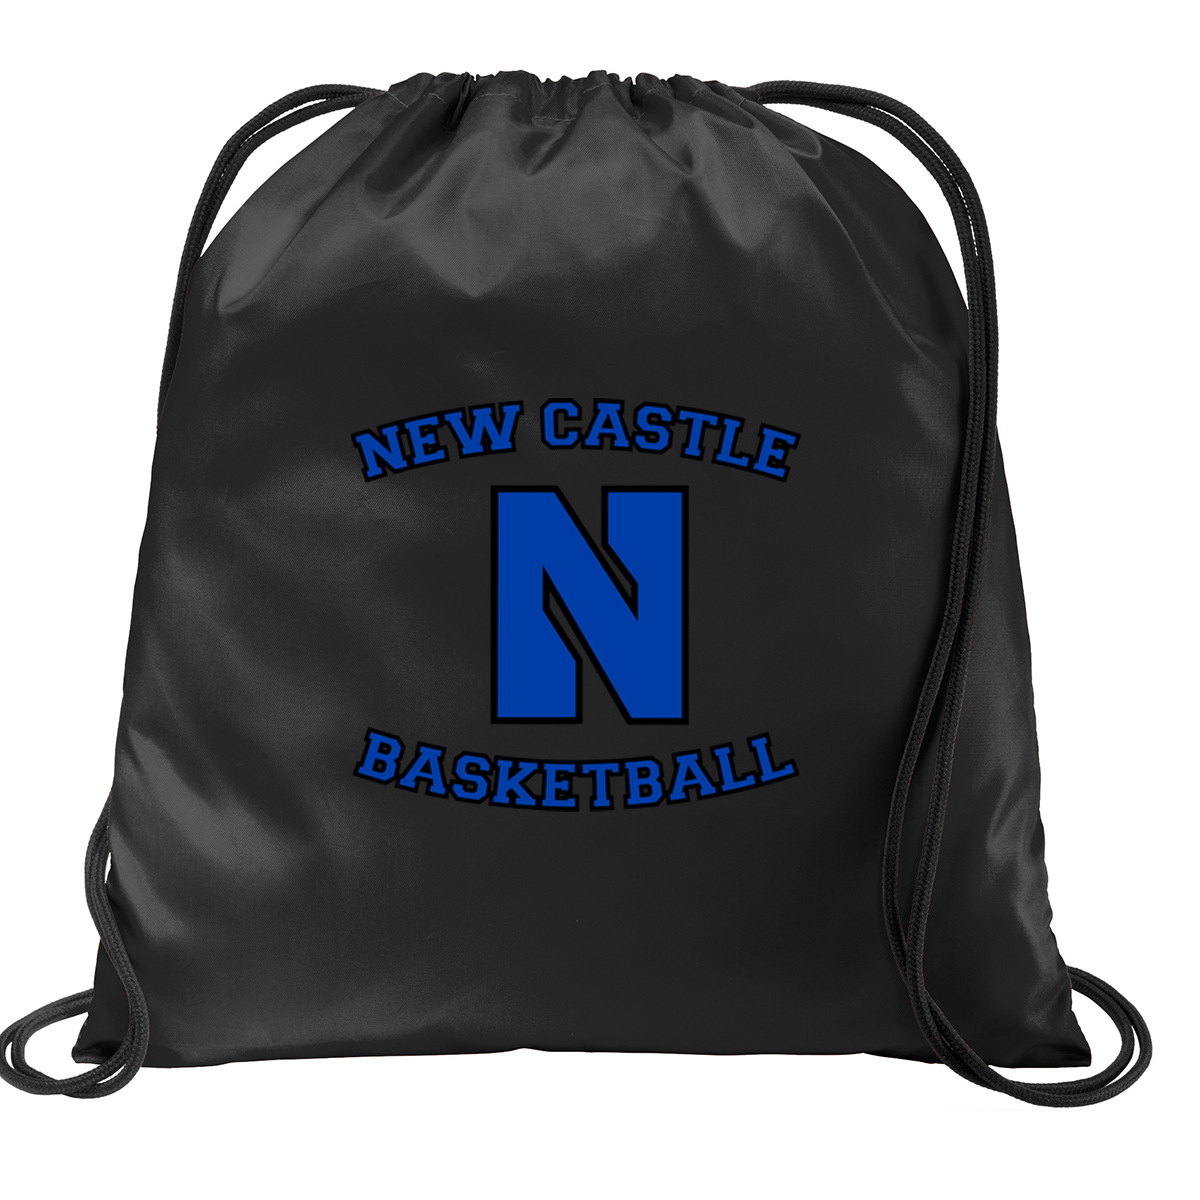 New Castle Basketball Cinch Pack